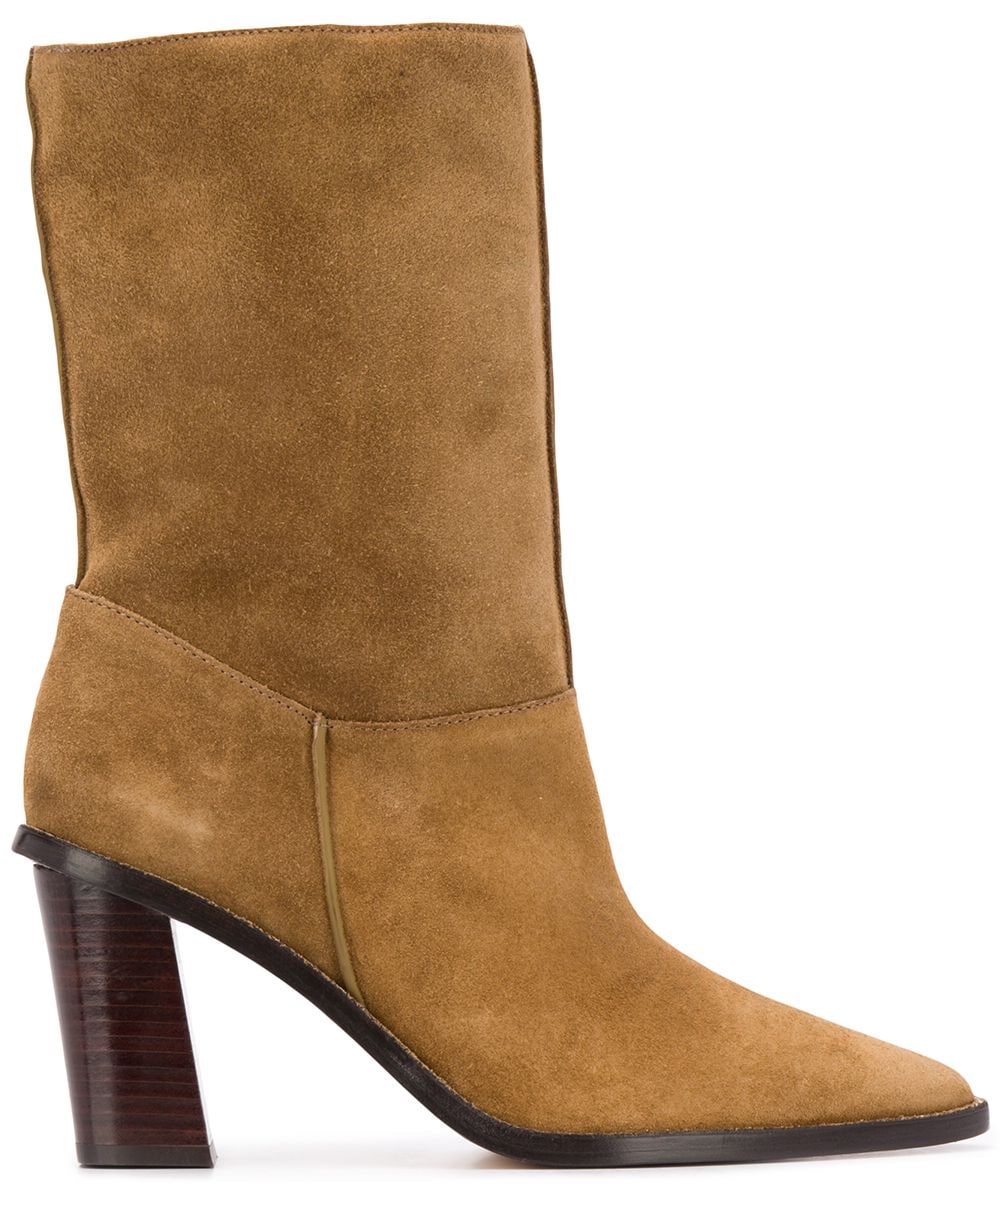 K Line Shearling Ankle Boots